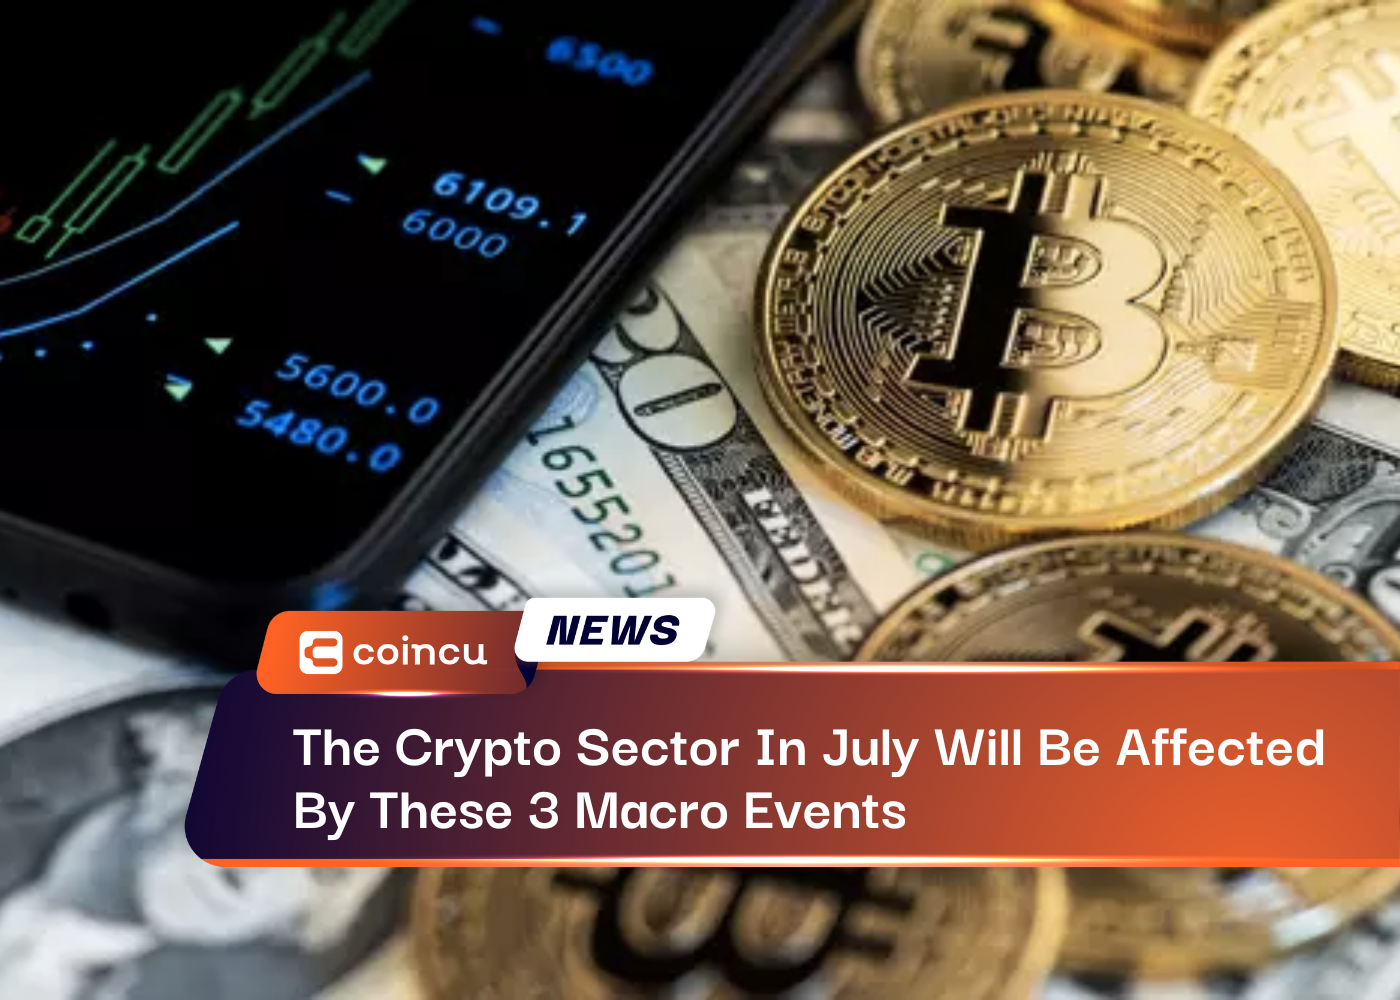 The Crypto Sector In July Will Be Affected By These 3 Macro Events